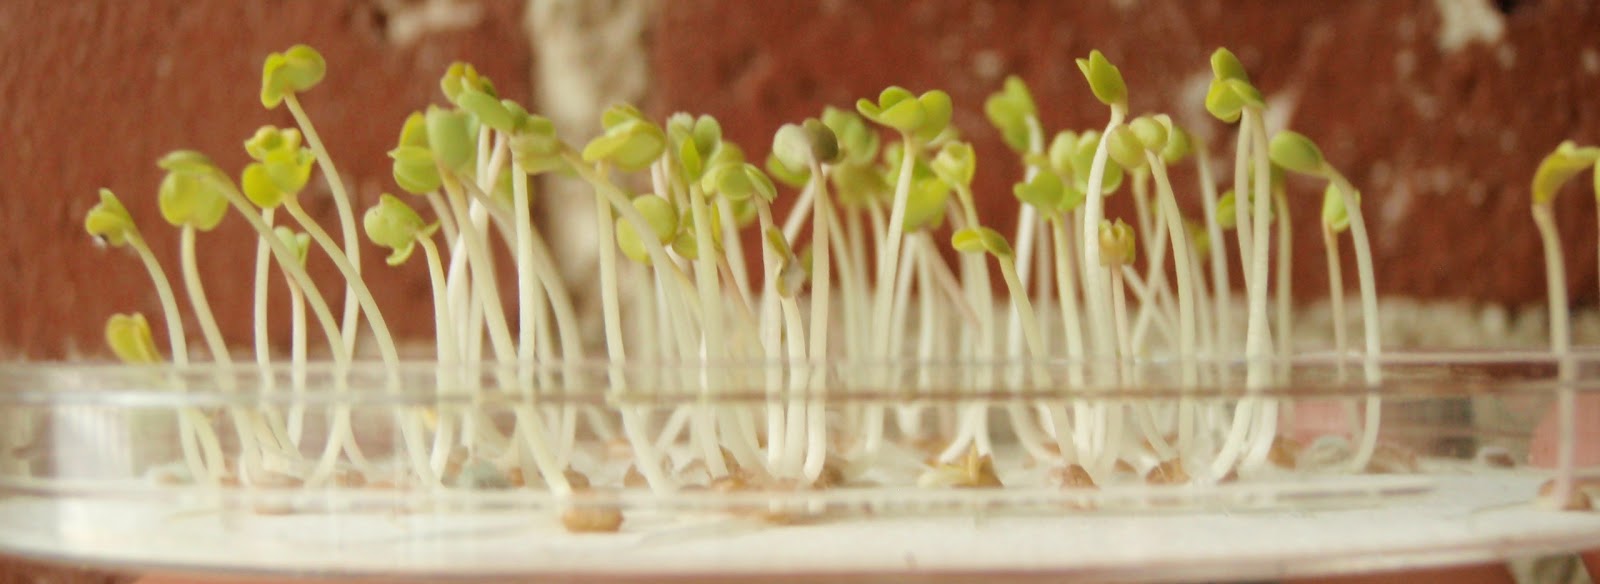 germination of mustard seeds experiment